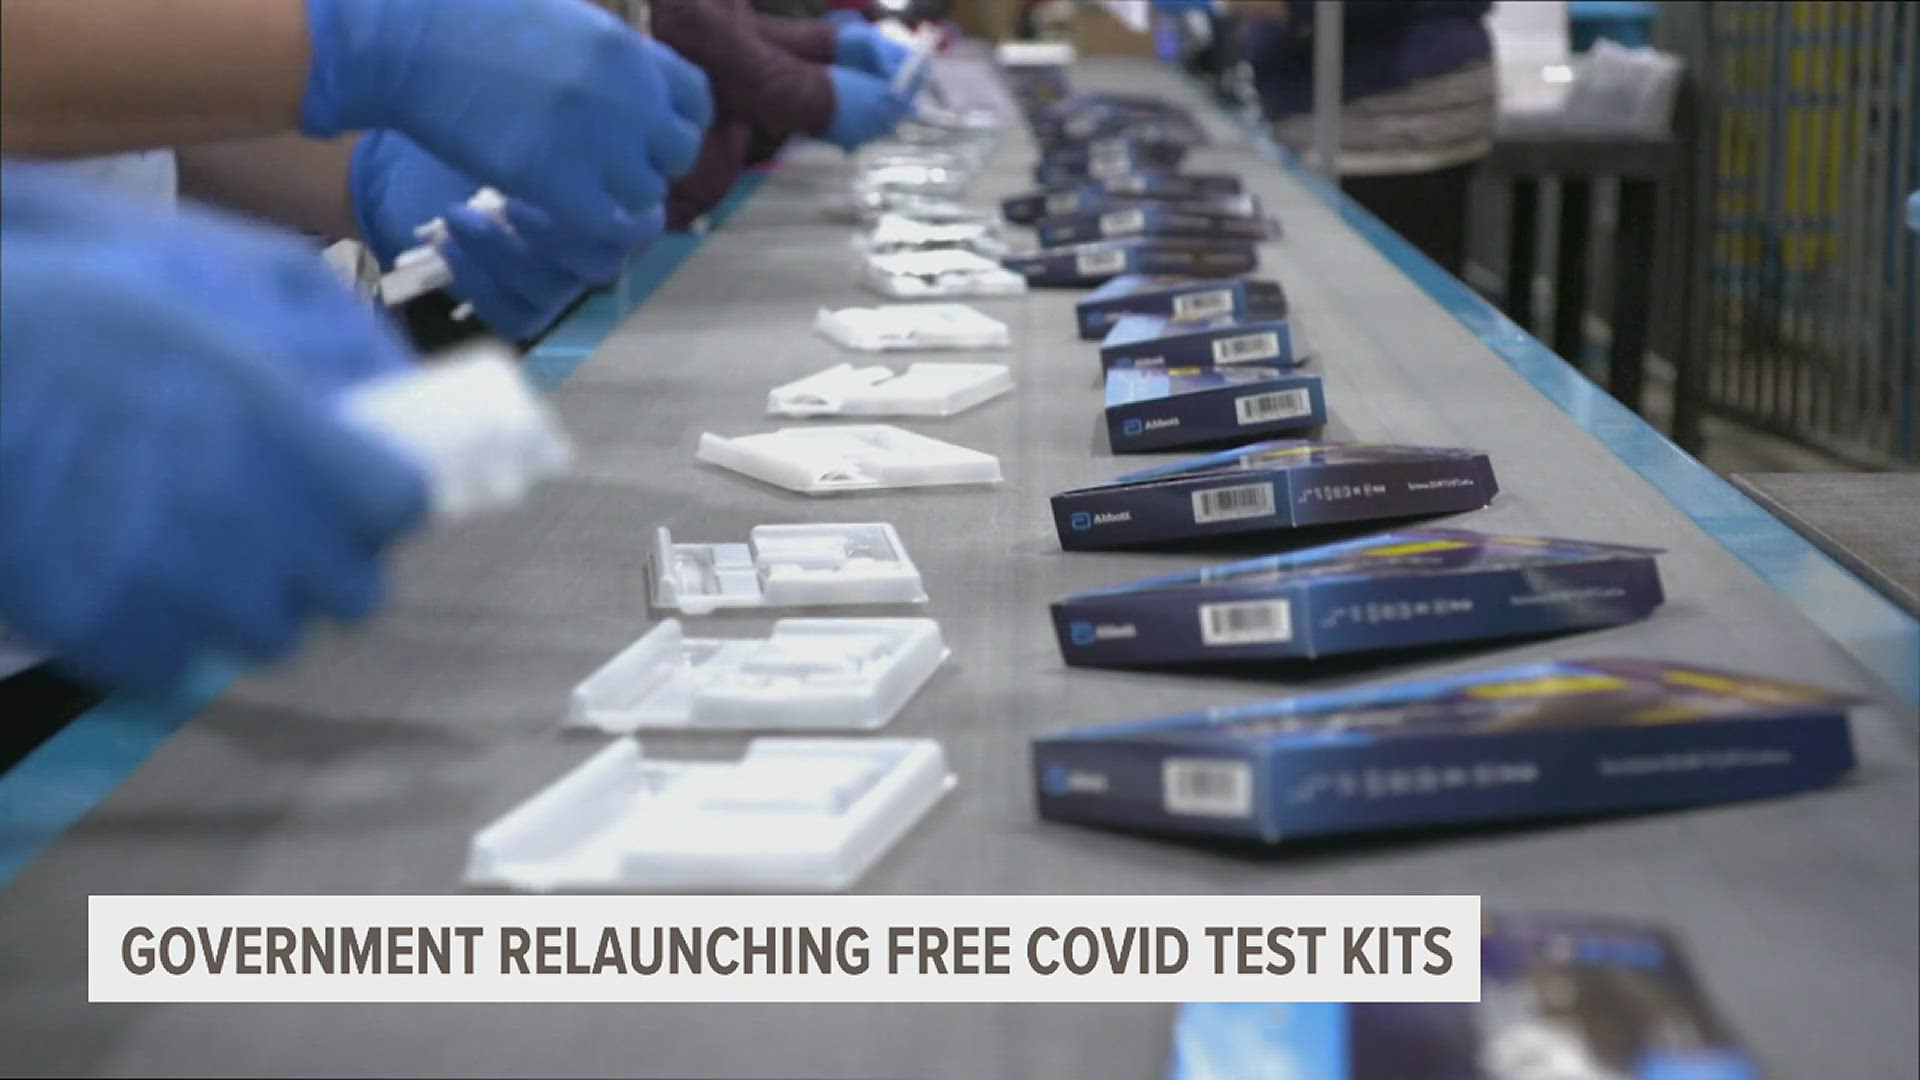 The Biden Administration has put forth funding to allow Americans to receive another set of at-home COVID tests.